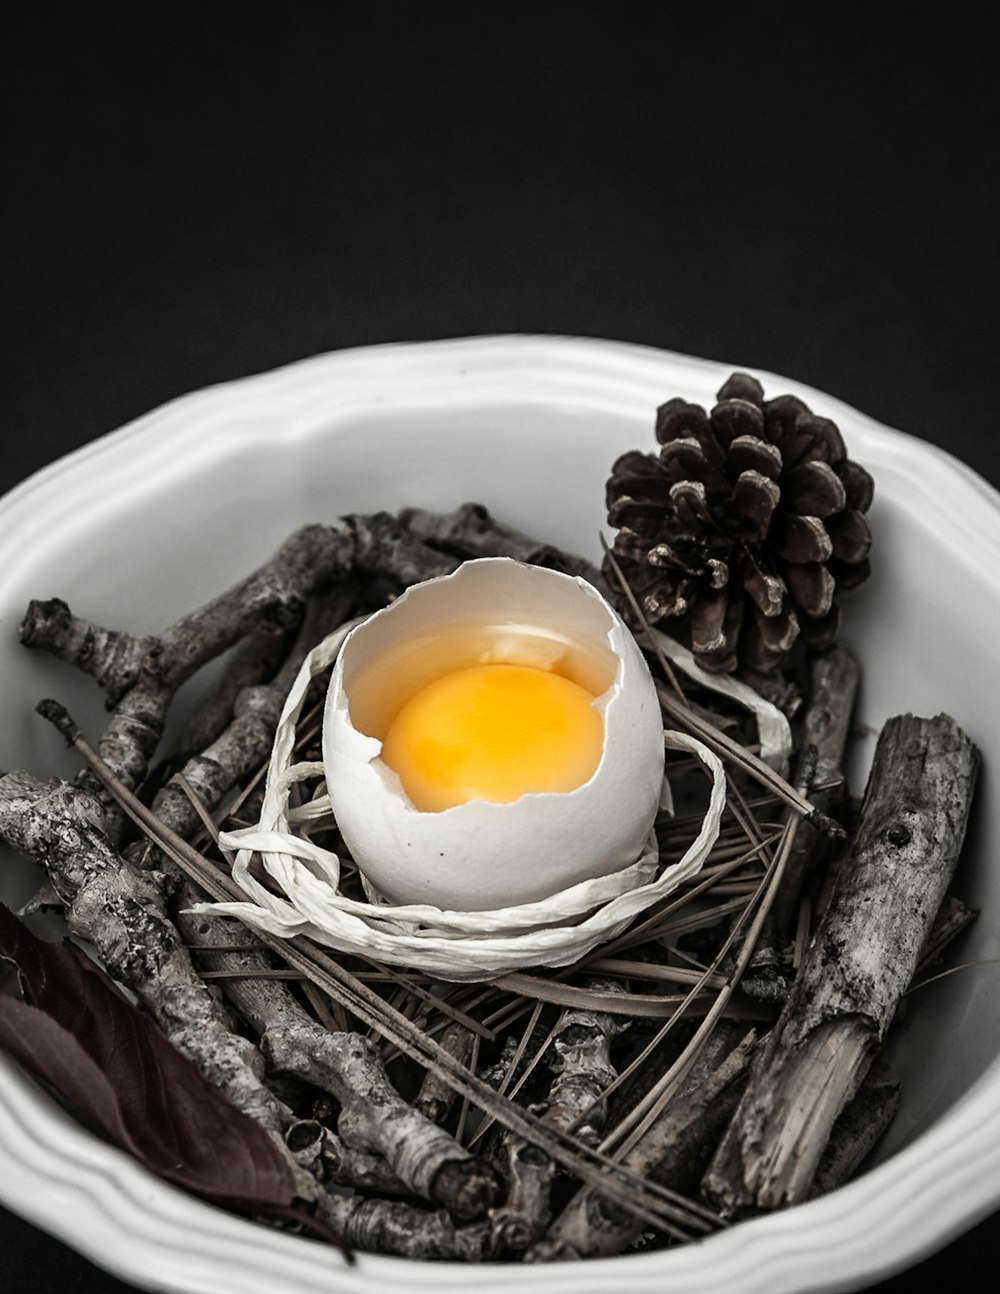 half-opened egg on bowl with tree twigs